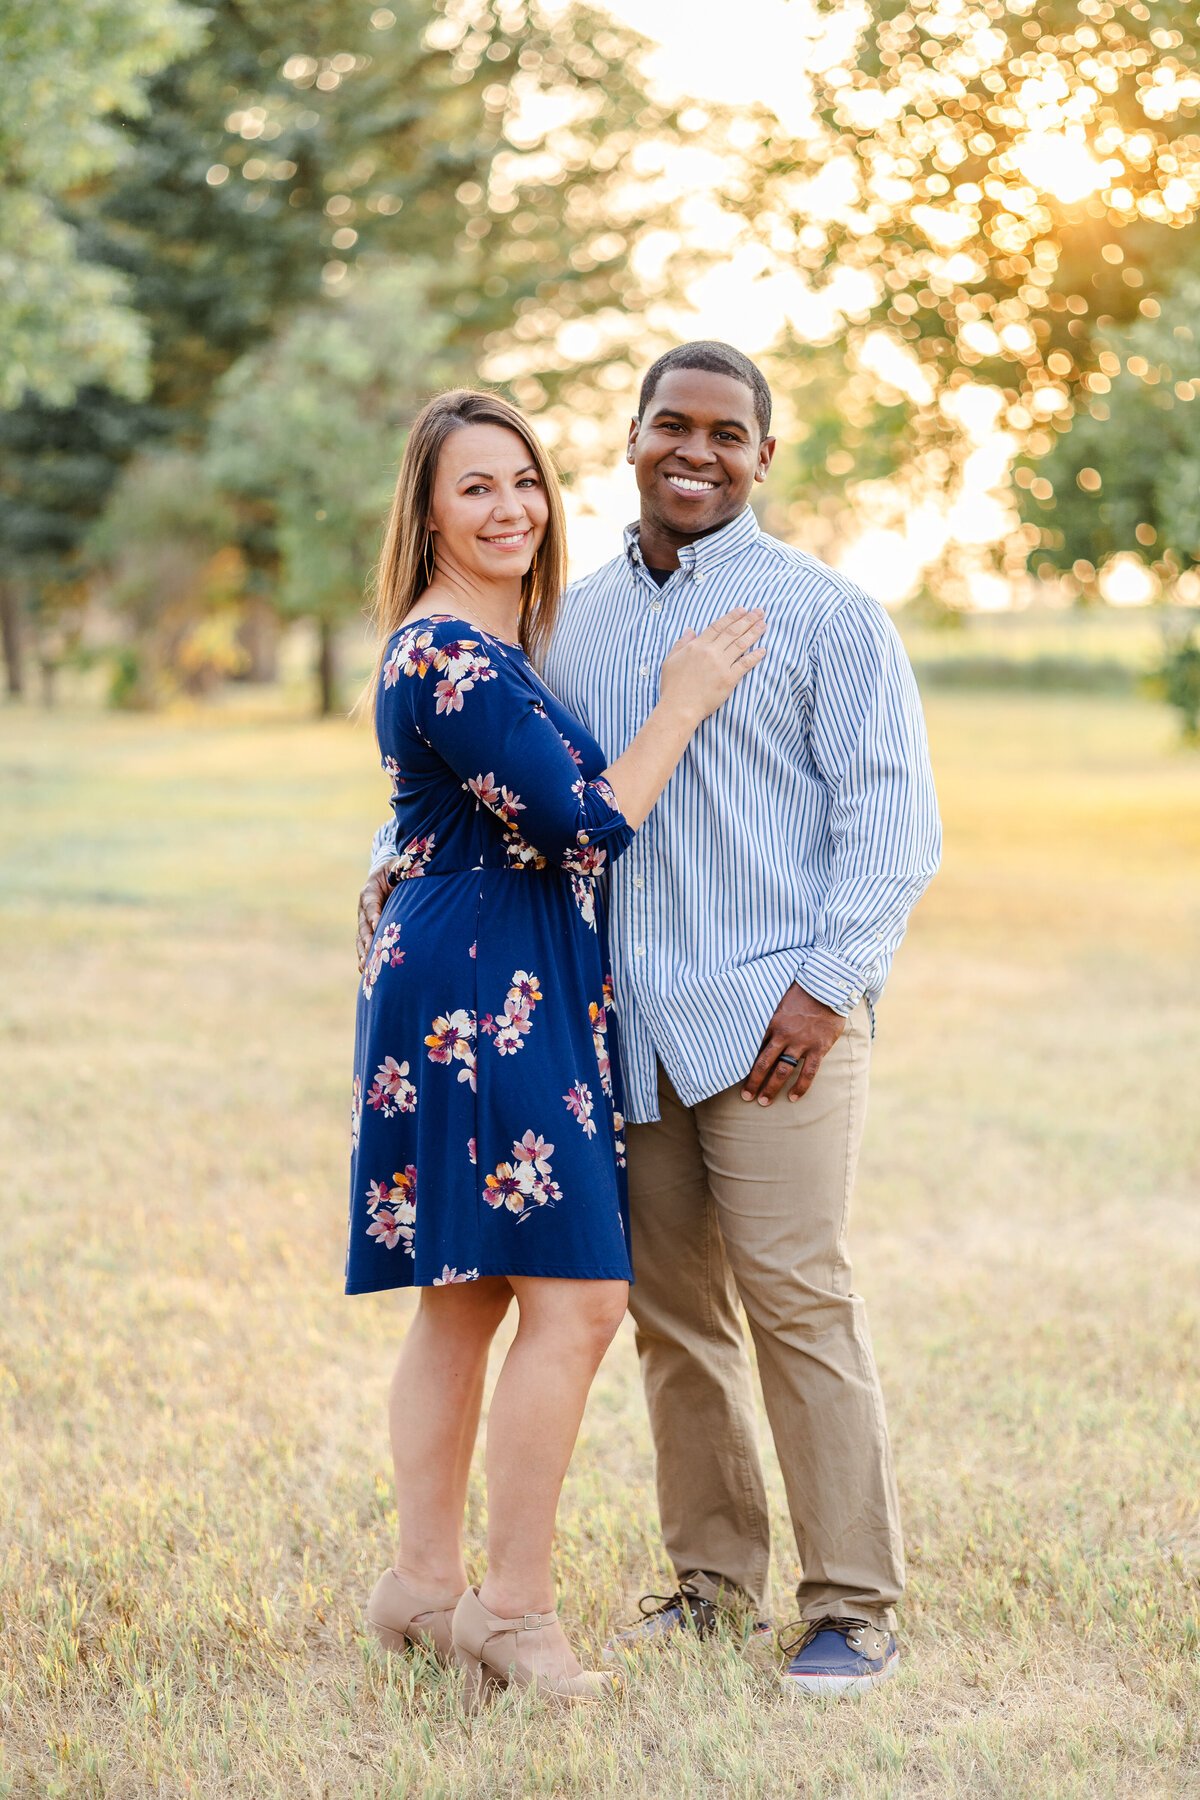 Colorado Springs Photographer - Couple standing in field with glowing sun behind them